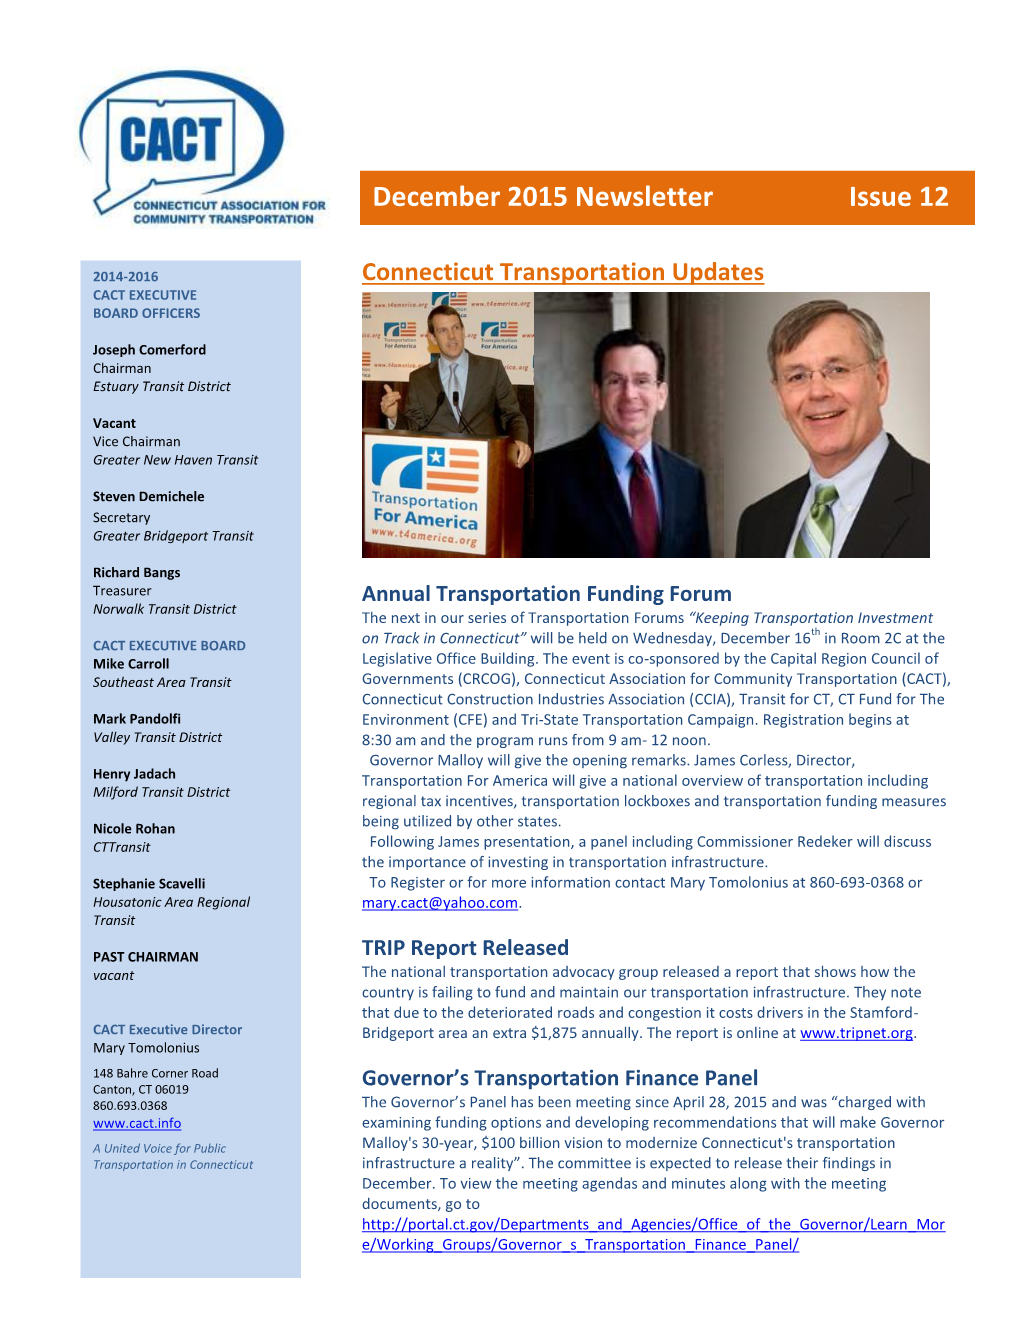 December 2015 Newsletter Issue 12 Page 1 2014-2016 Connecticut Transportation Updates CACT EXECUTIVE BOARD OFFICERS